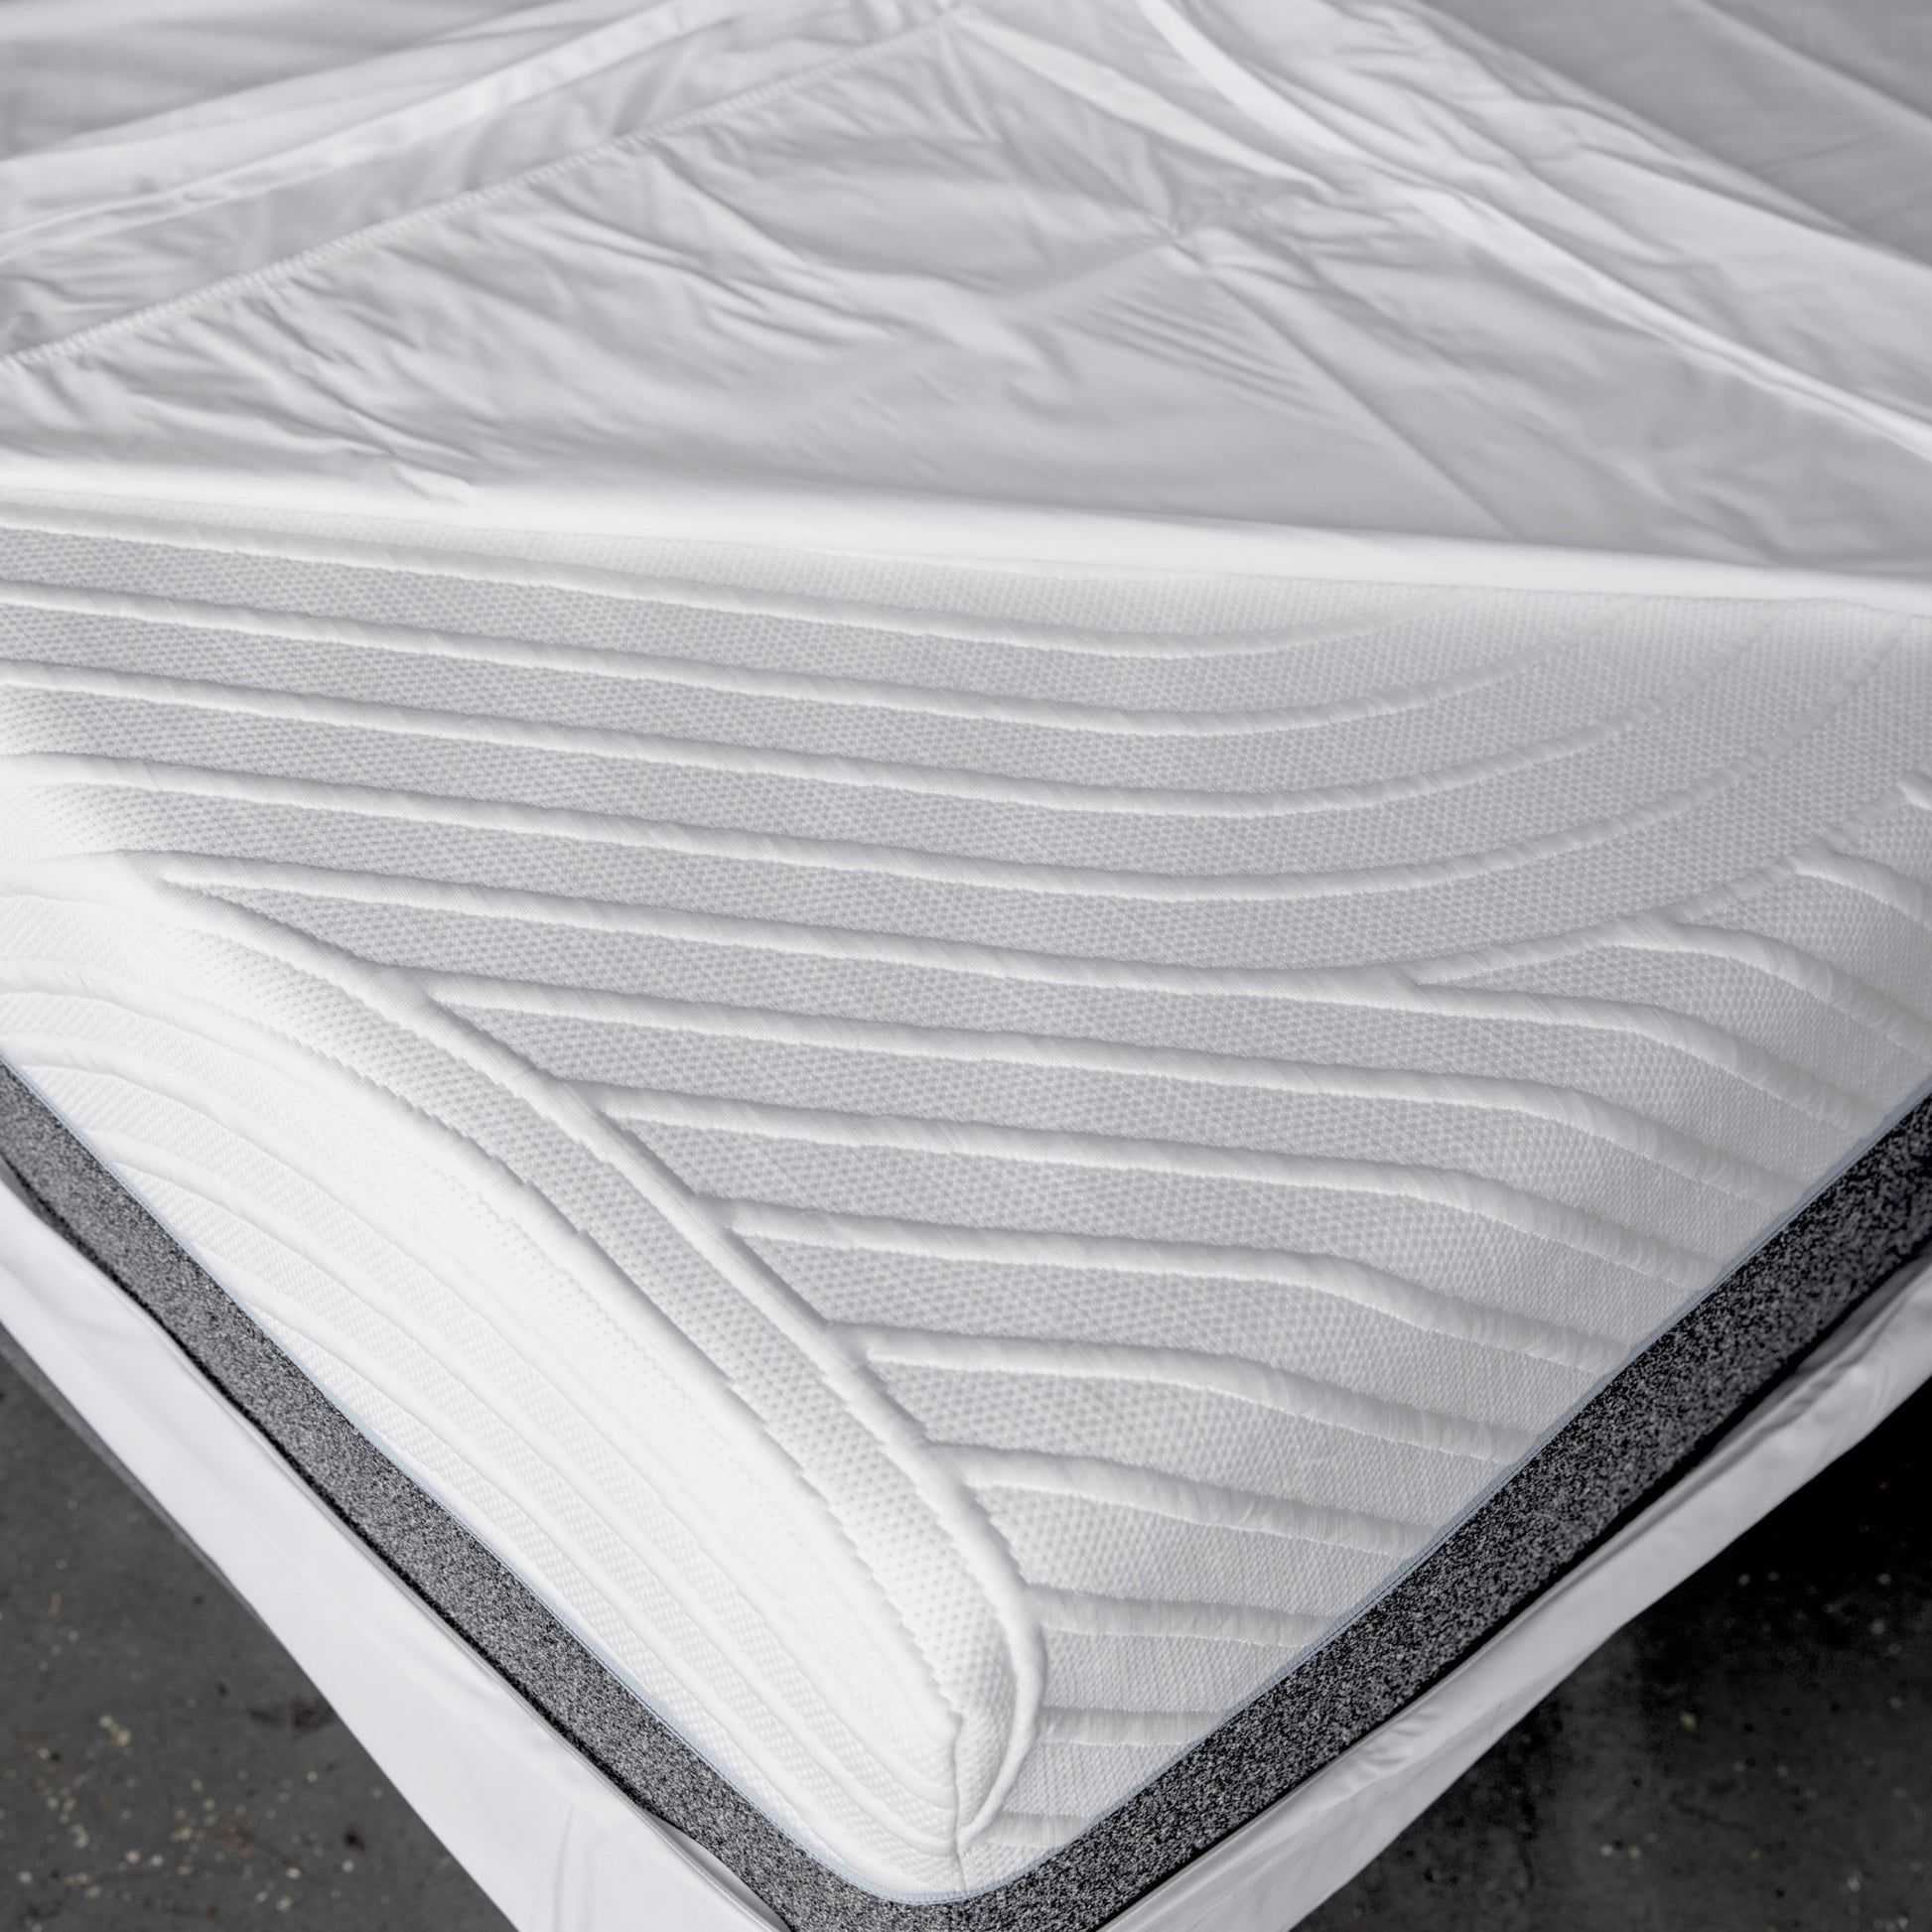 Fully Encased Protector - 89.99 MLILY Mattress Protectors HavenPlaceUSA